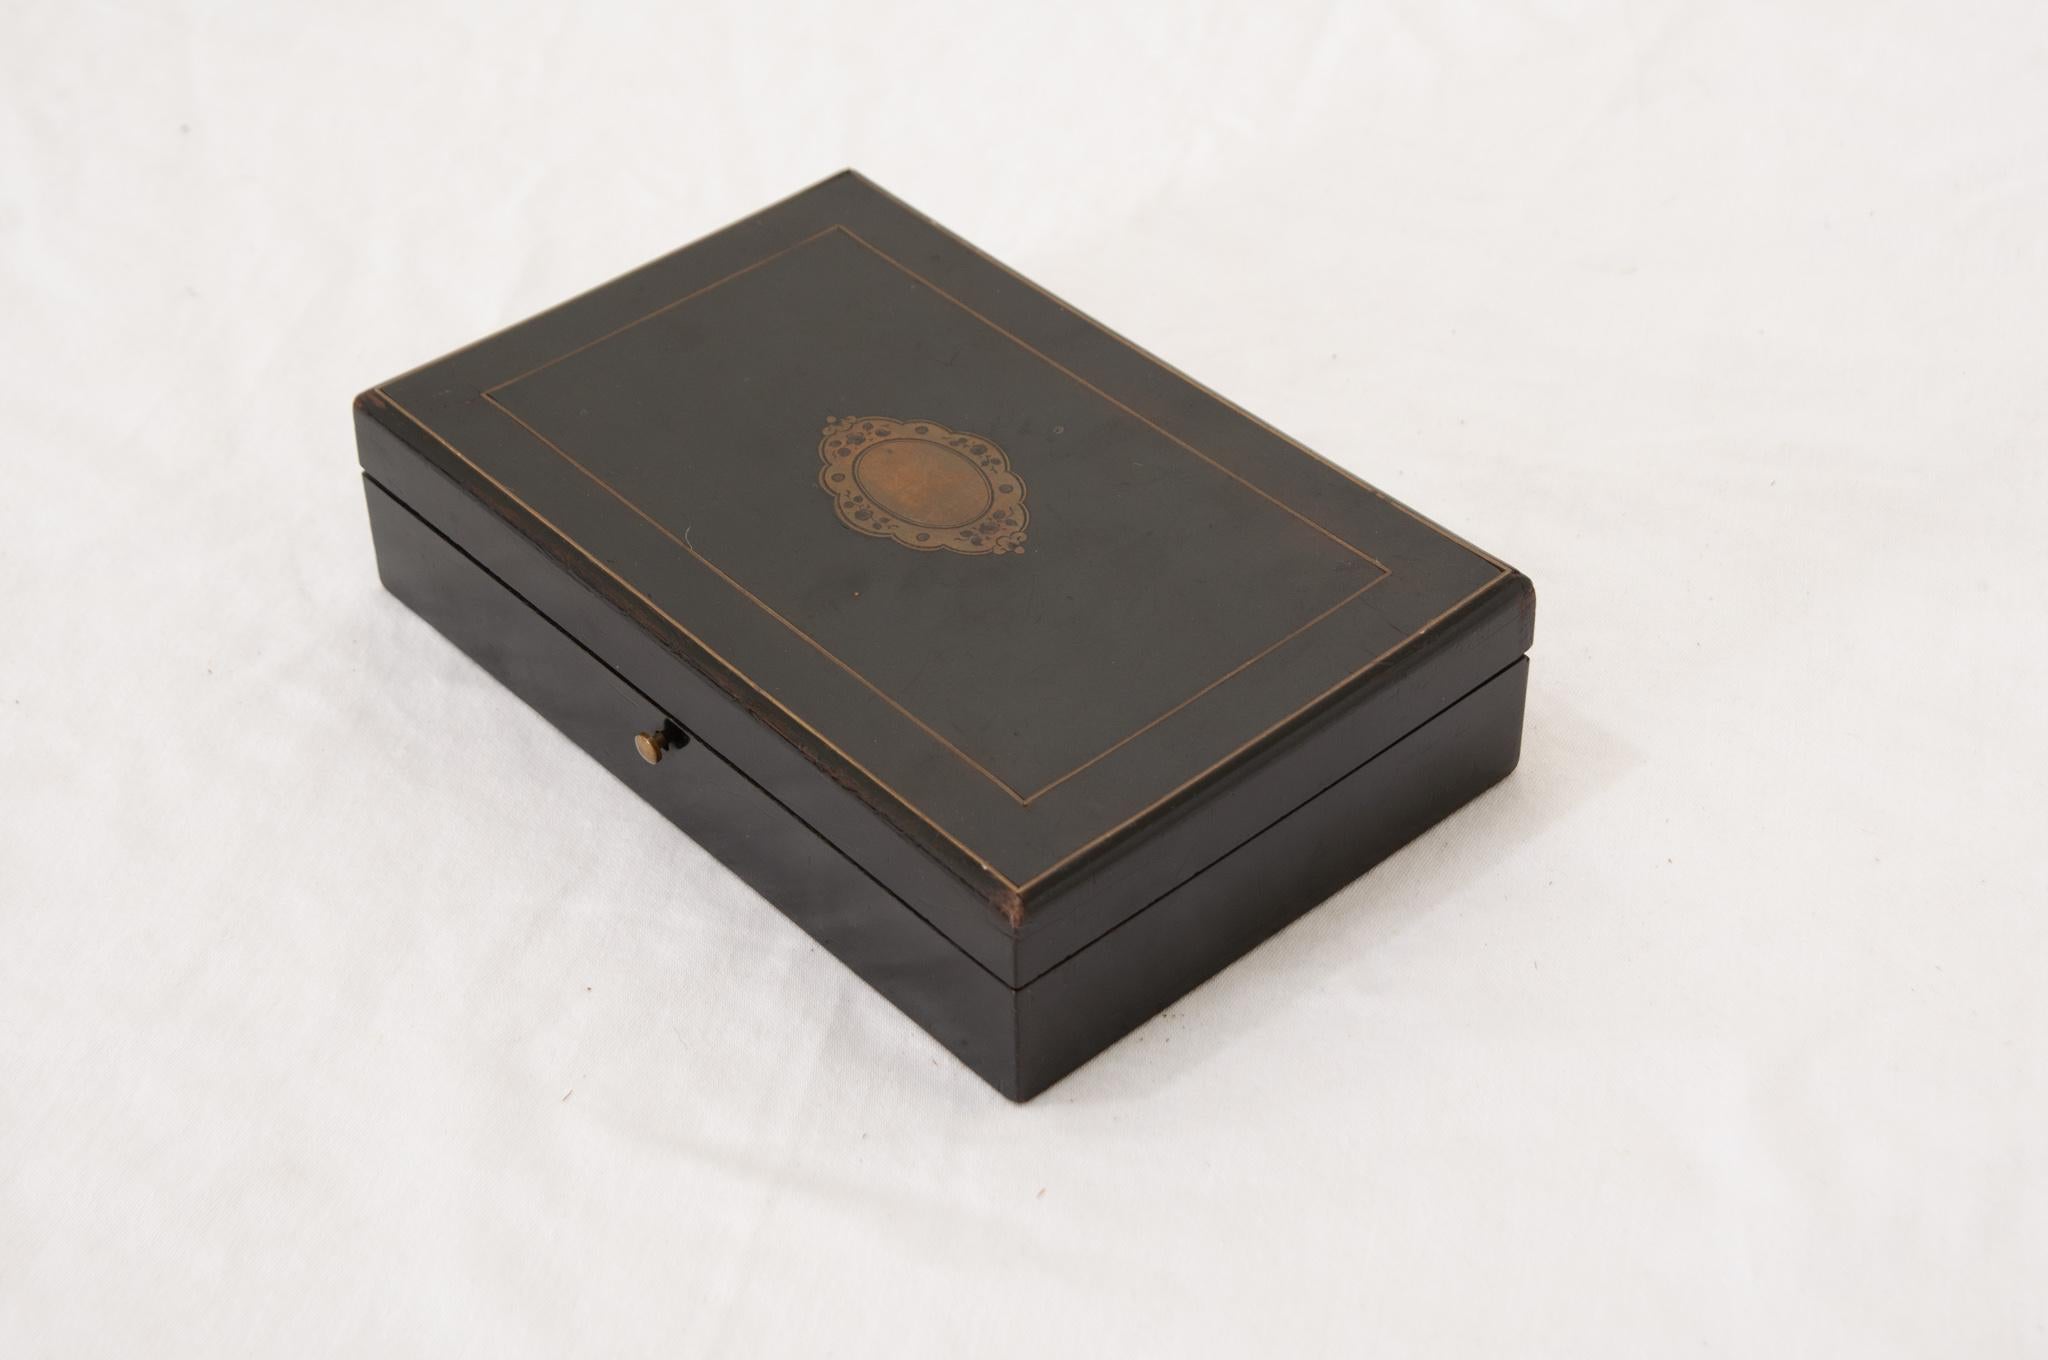 A French 19th Century decorative box opening on brass hinges. Inside you’ll find the box is fitted with two levels of storage with five compartments. This is most likely used for storing jewelry. This handsome box features ebonized wood with a brass